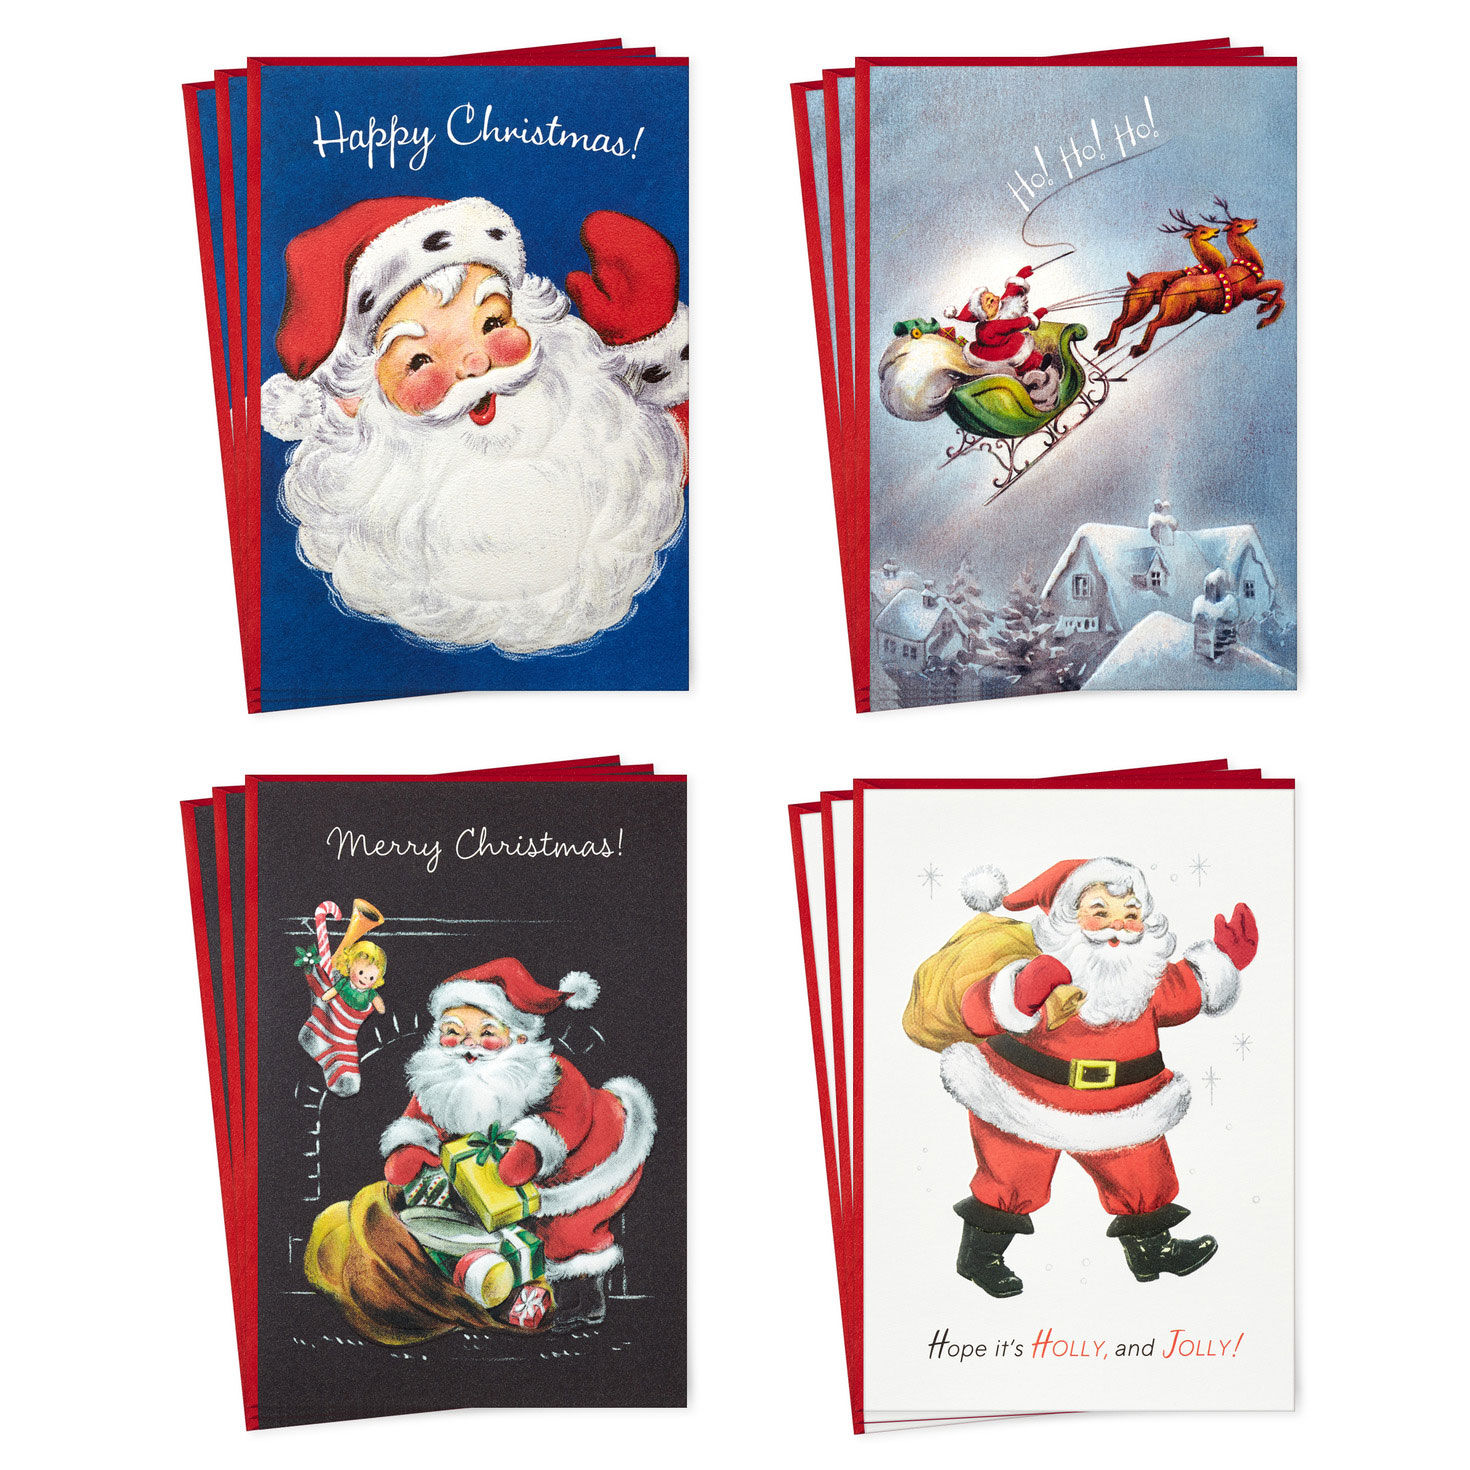 Colorful Vintage 6 Designs, 24 Cards with Envelopes Hallmark Boxed Christmas Cards Assortment 